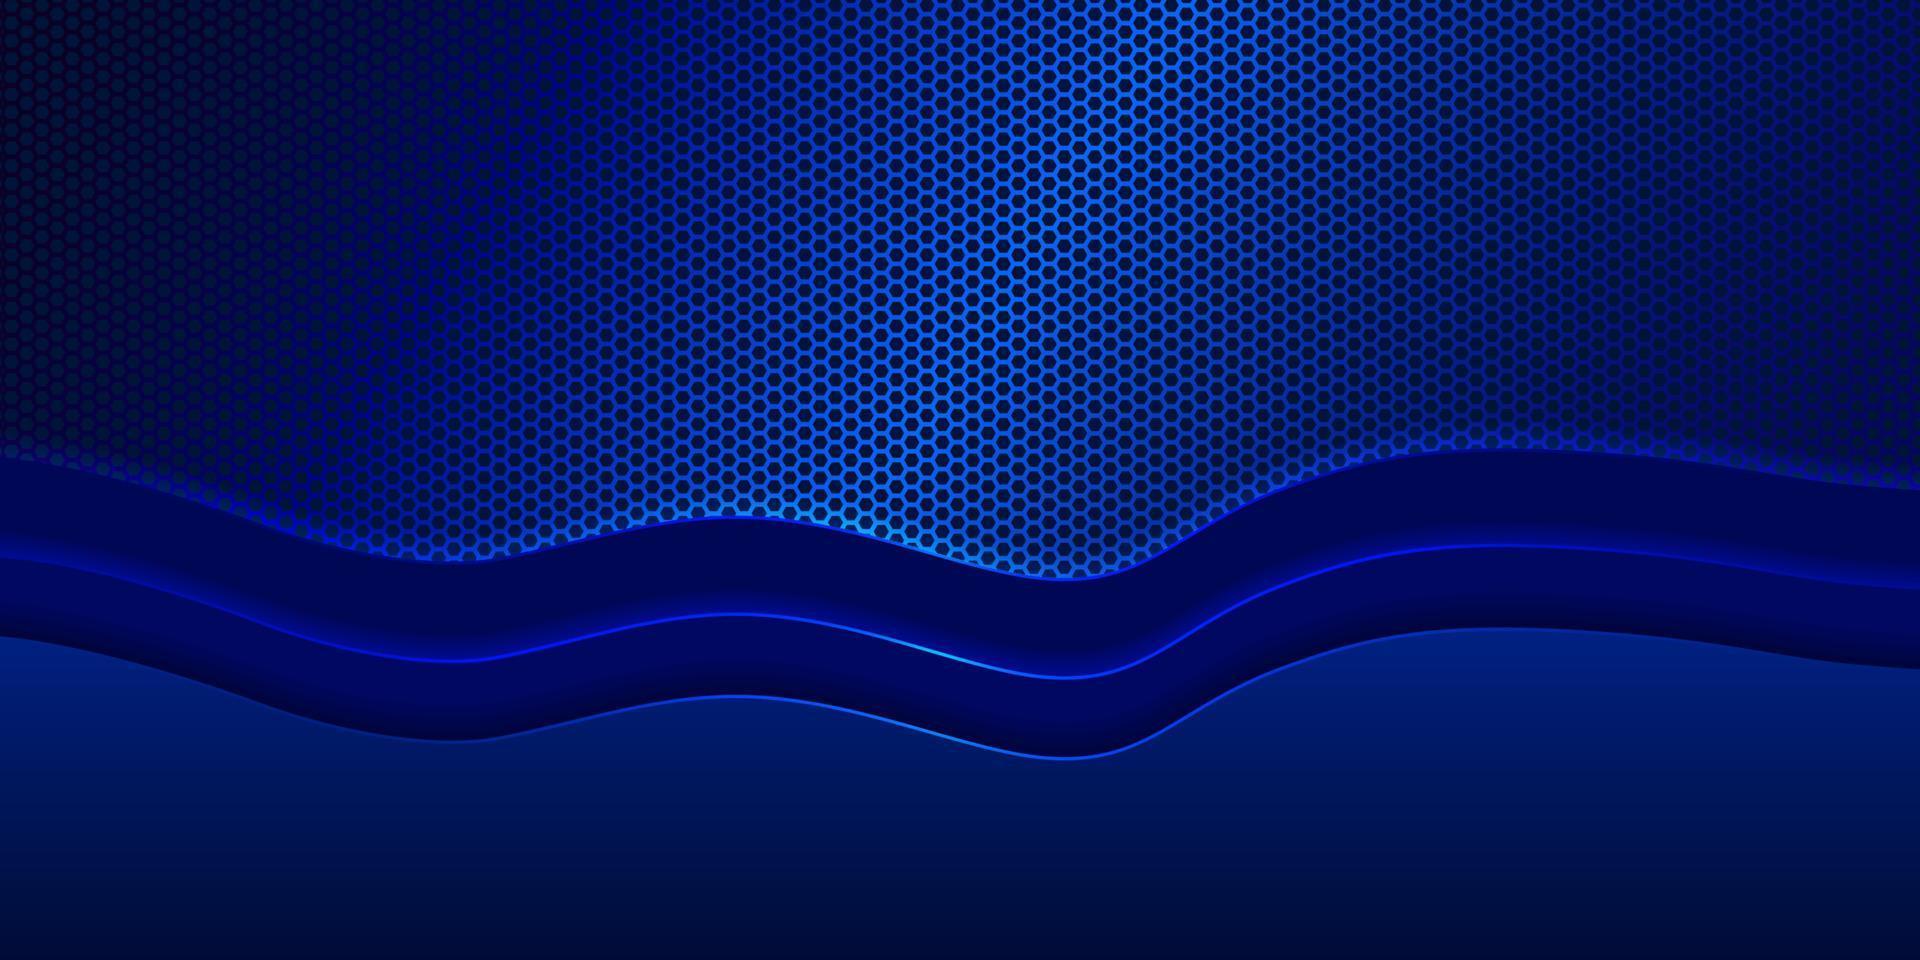 Blue abstract background hexagonal metal texture curved wave band,vector illustration. vector